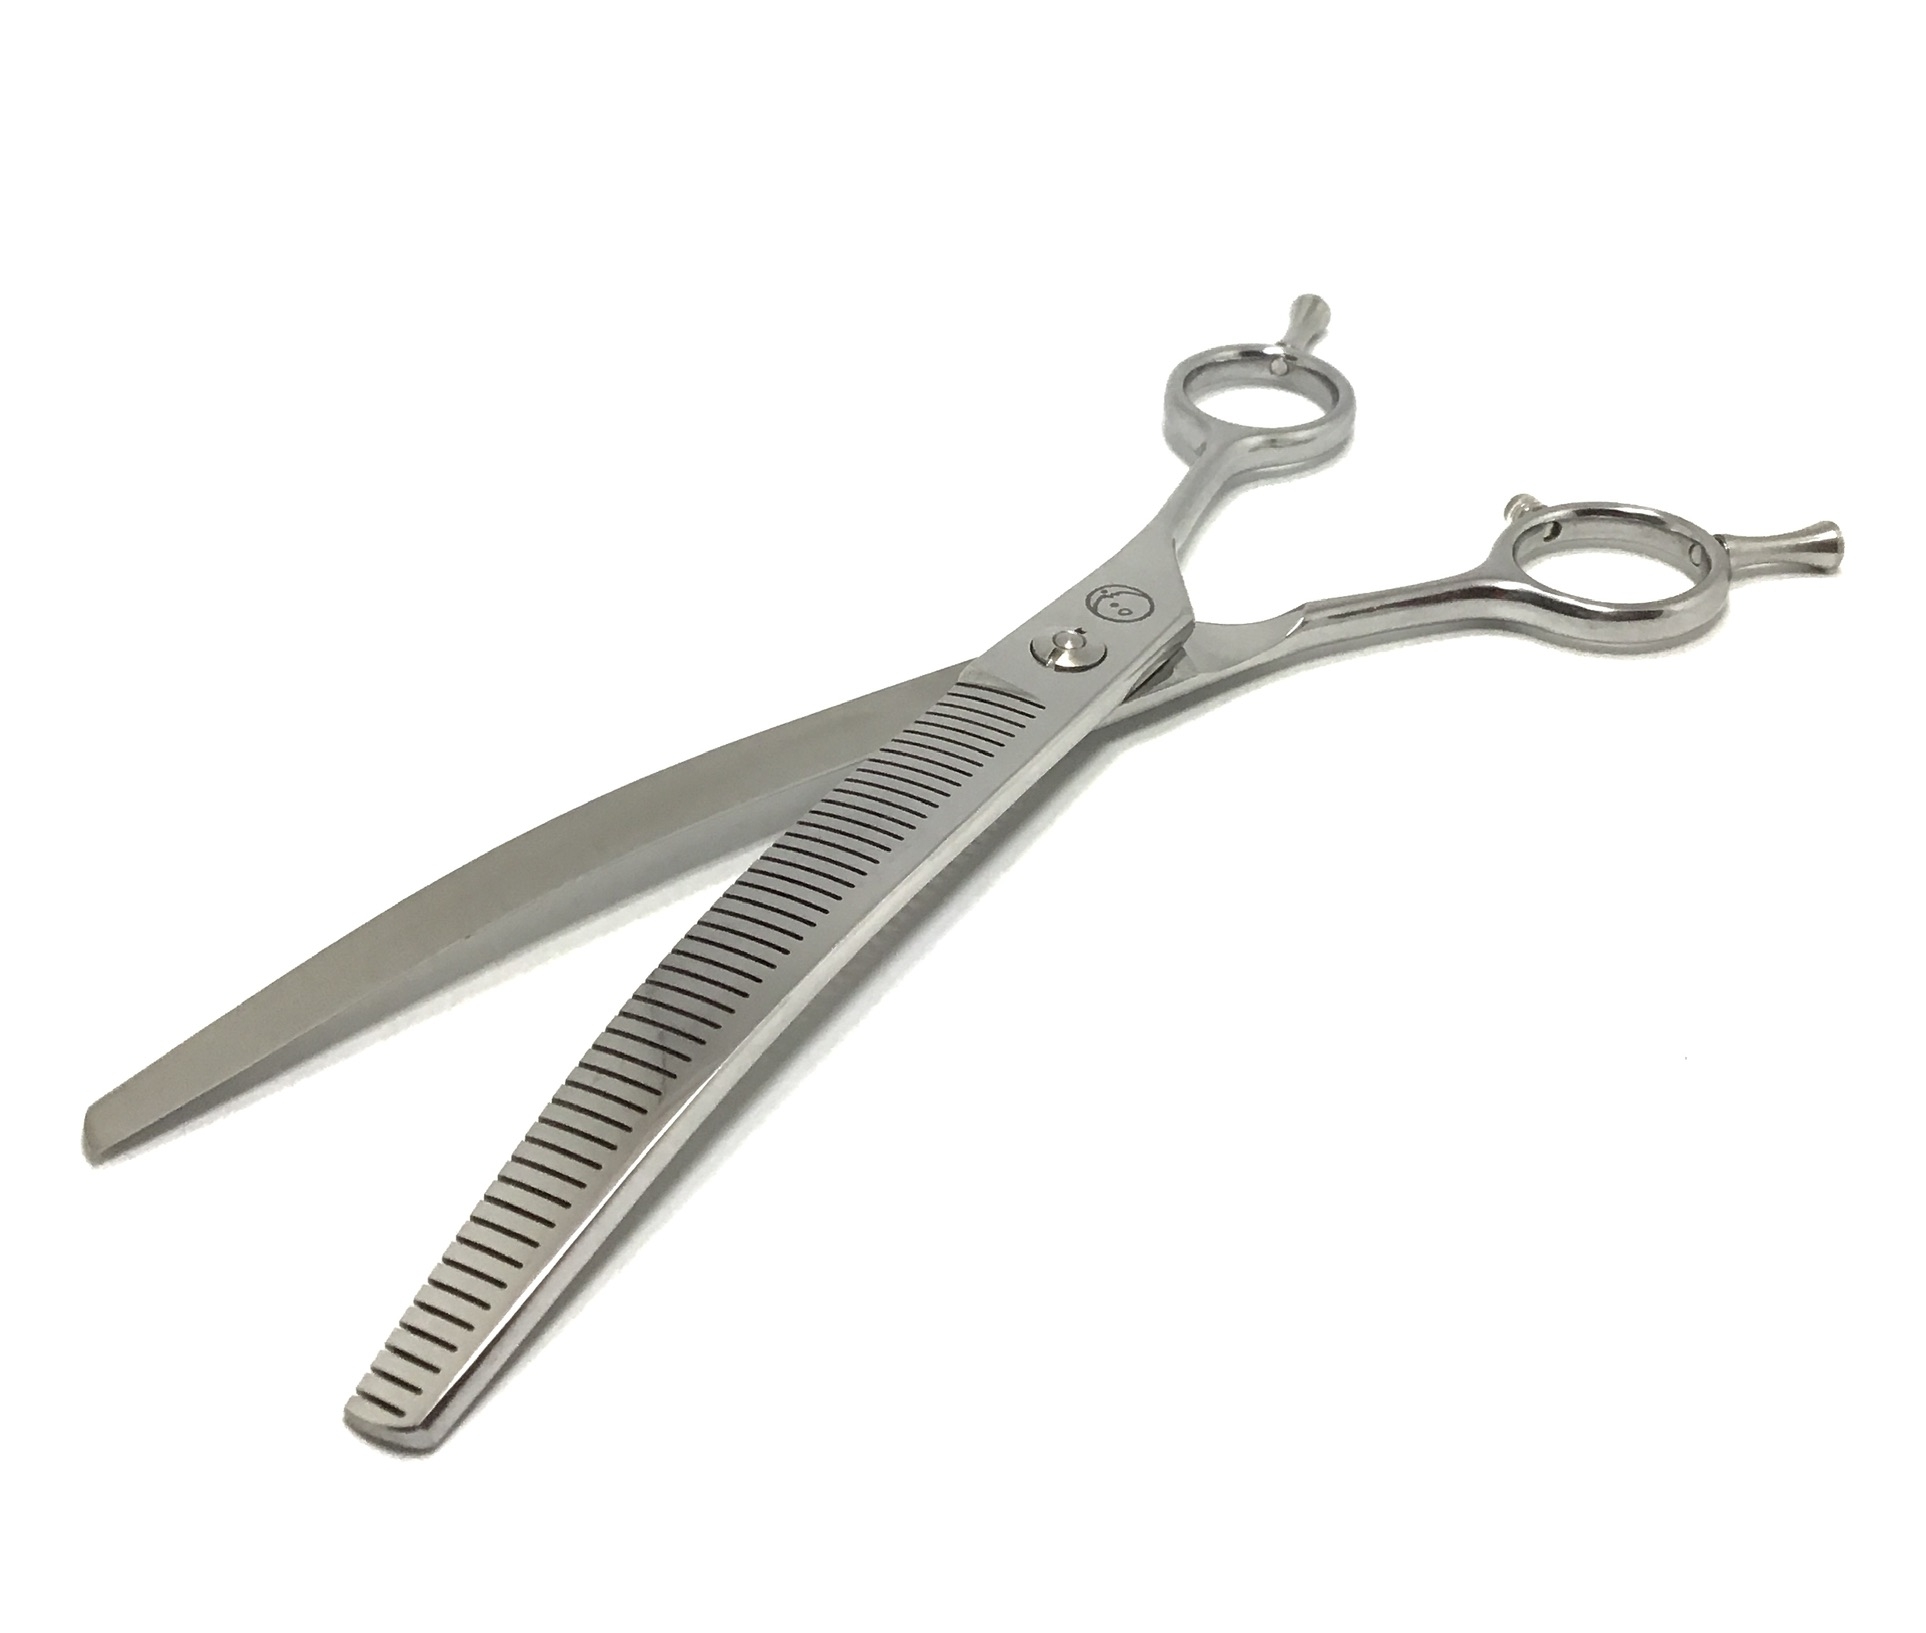 Lumo-X Trimming Scissors Pruning Snips with Titanium Coated CURVED Bla —  CHIMIYA